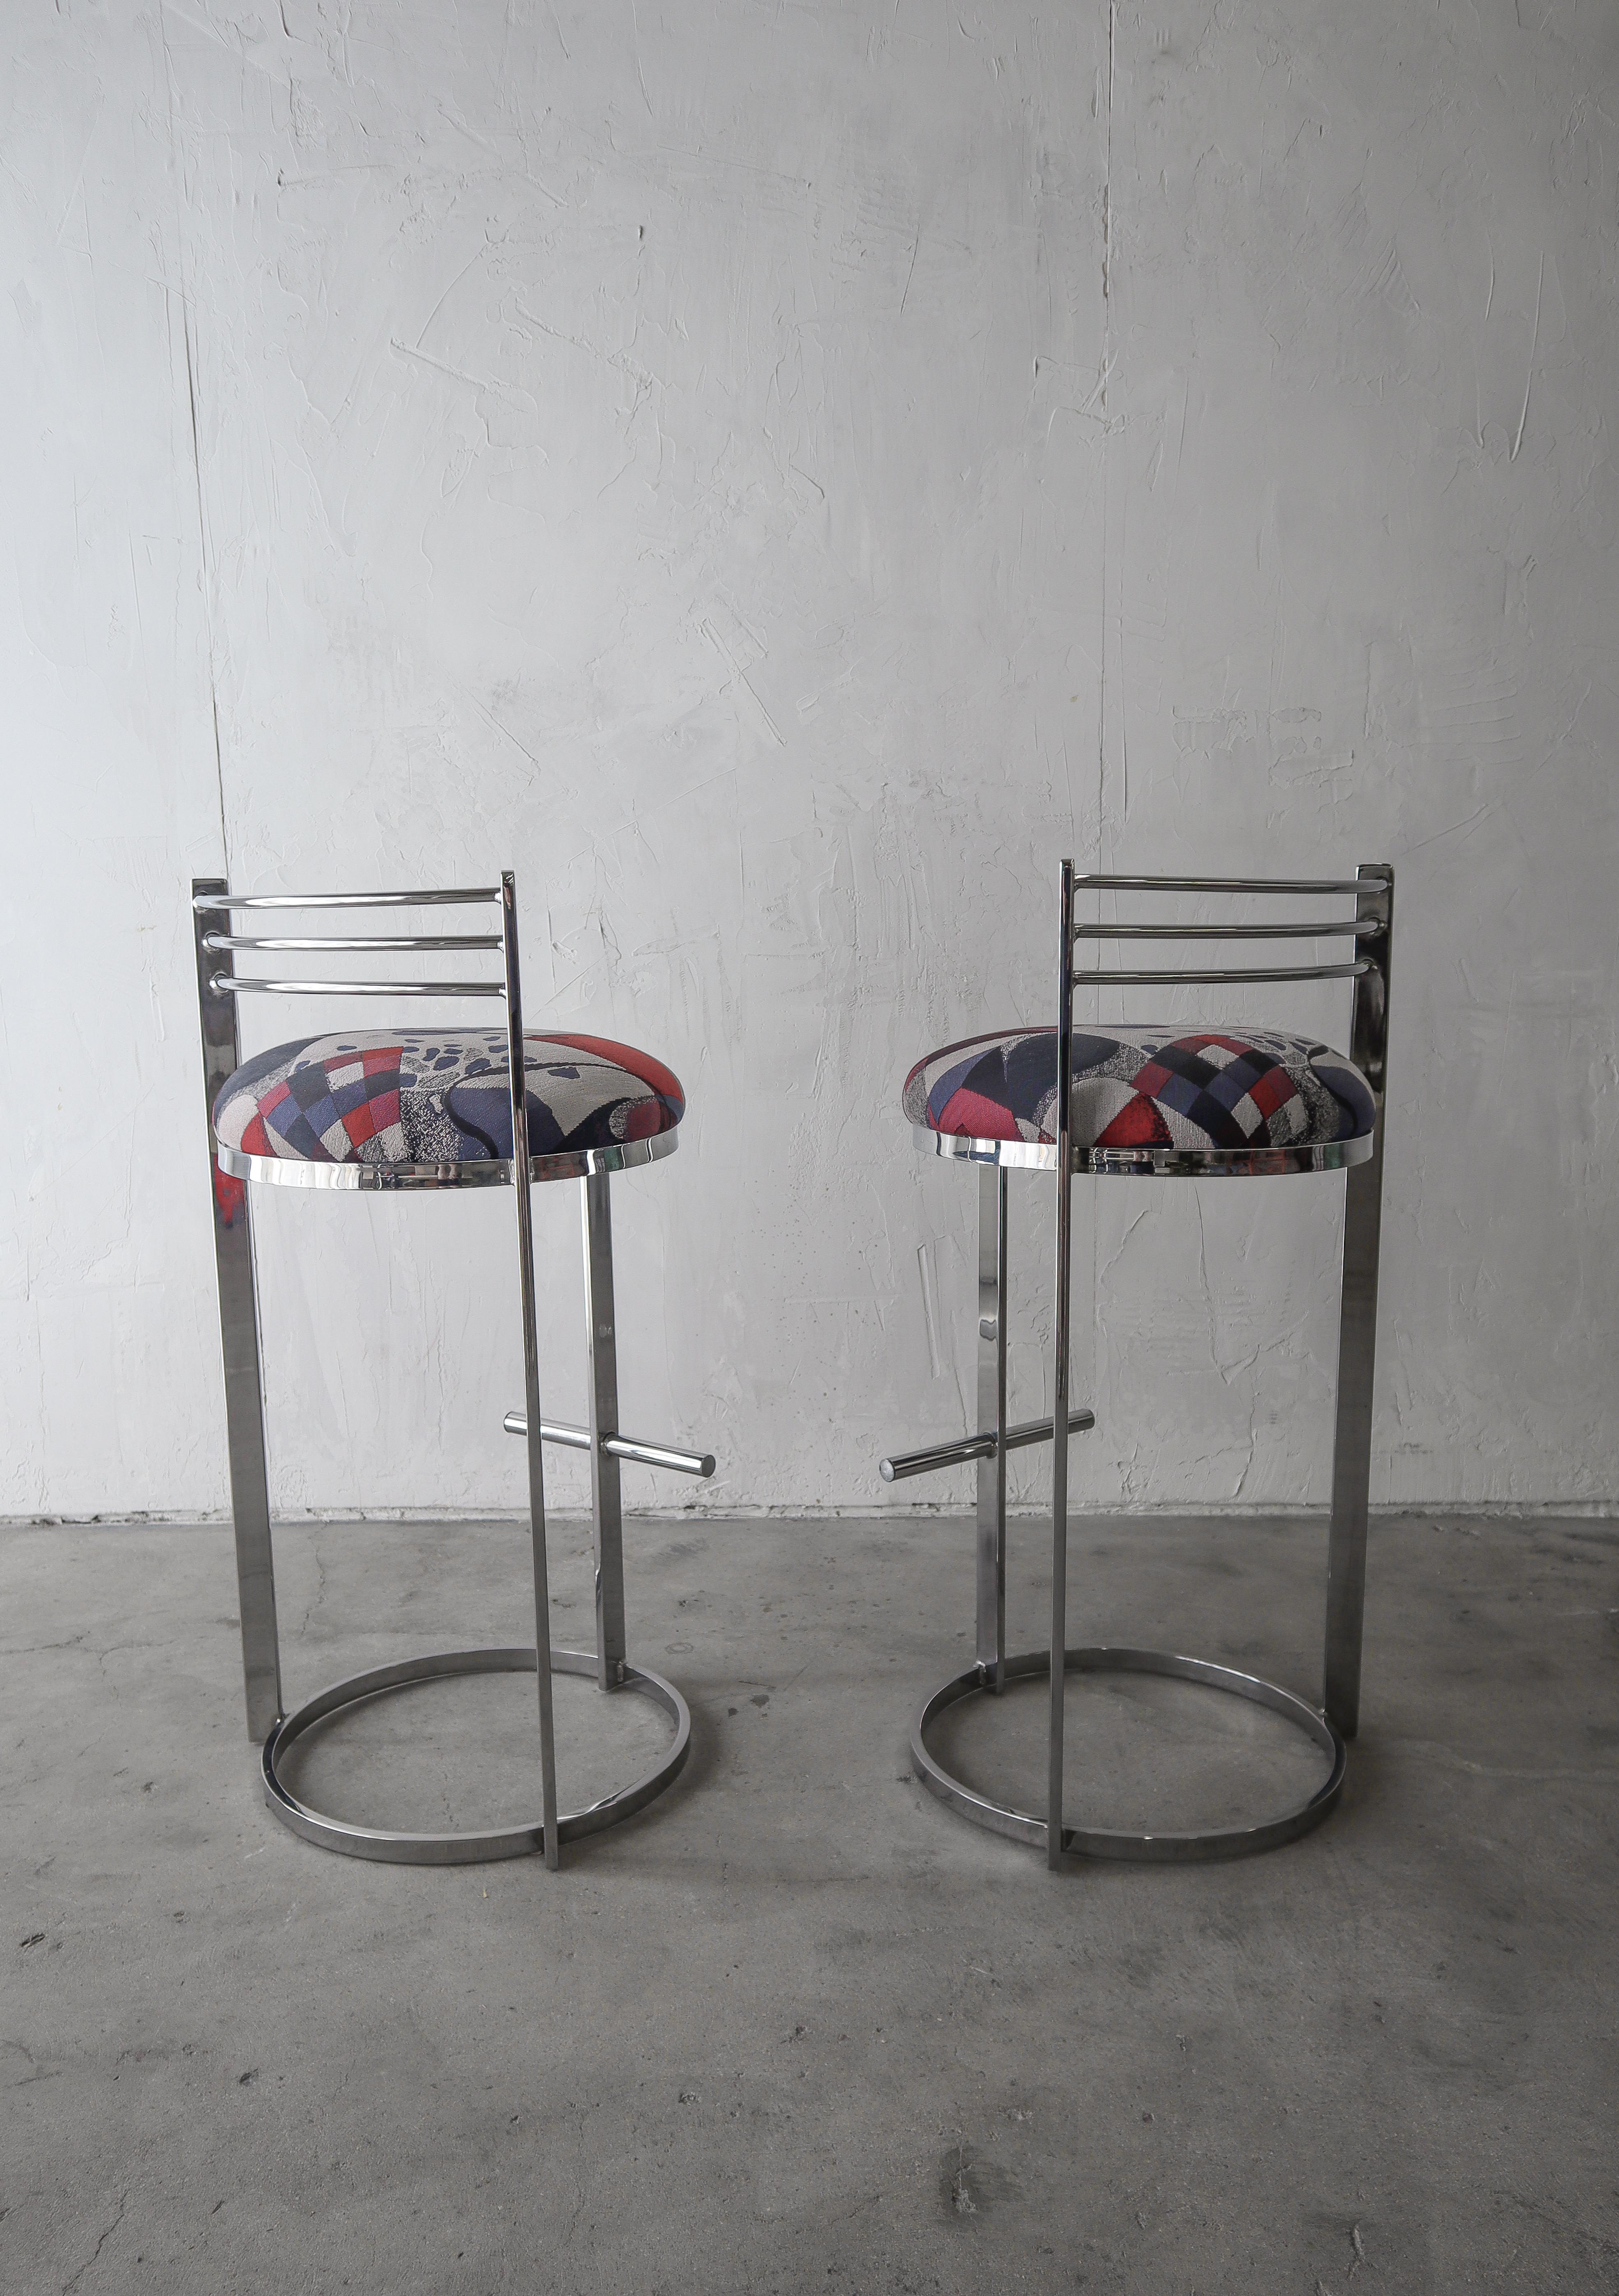 Fun pair of chrome Post Modern stools.

Stools are in excellent, as found condition. Chrome shows minimal signs of age appropriate wear but is shiney with no real damage. Fabric is free of stains, odors or damage. Stools can be used as is.

